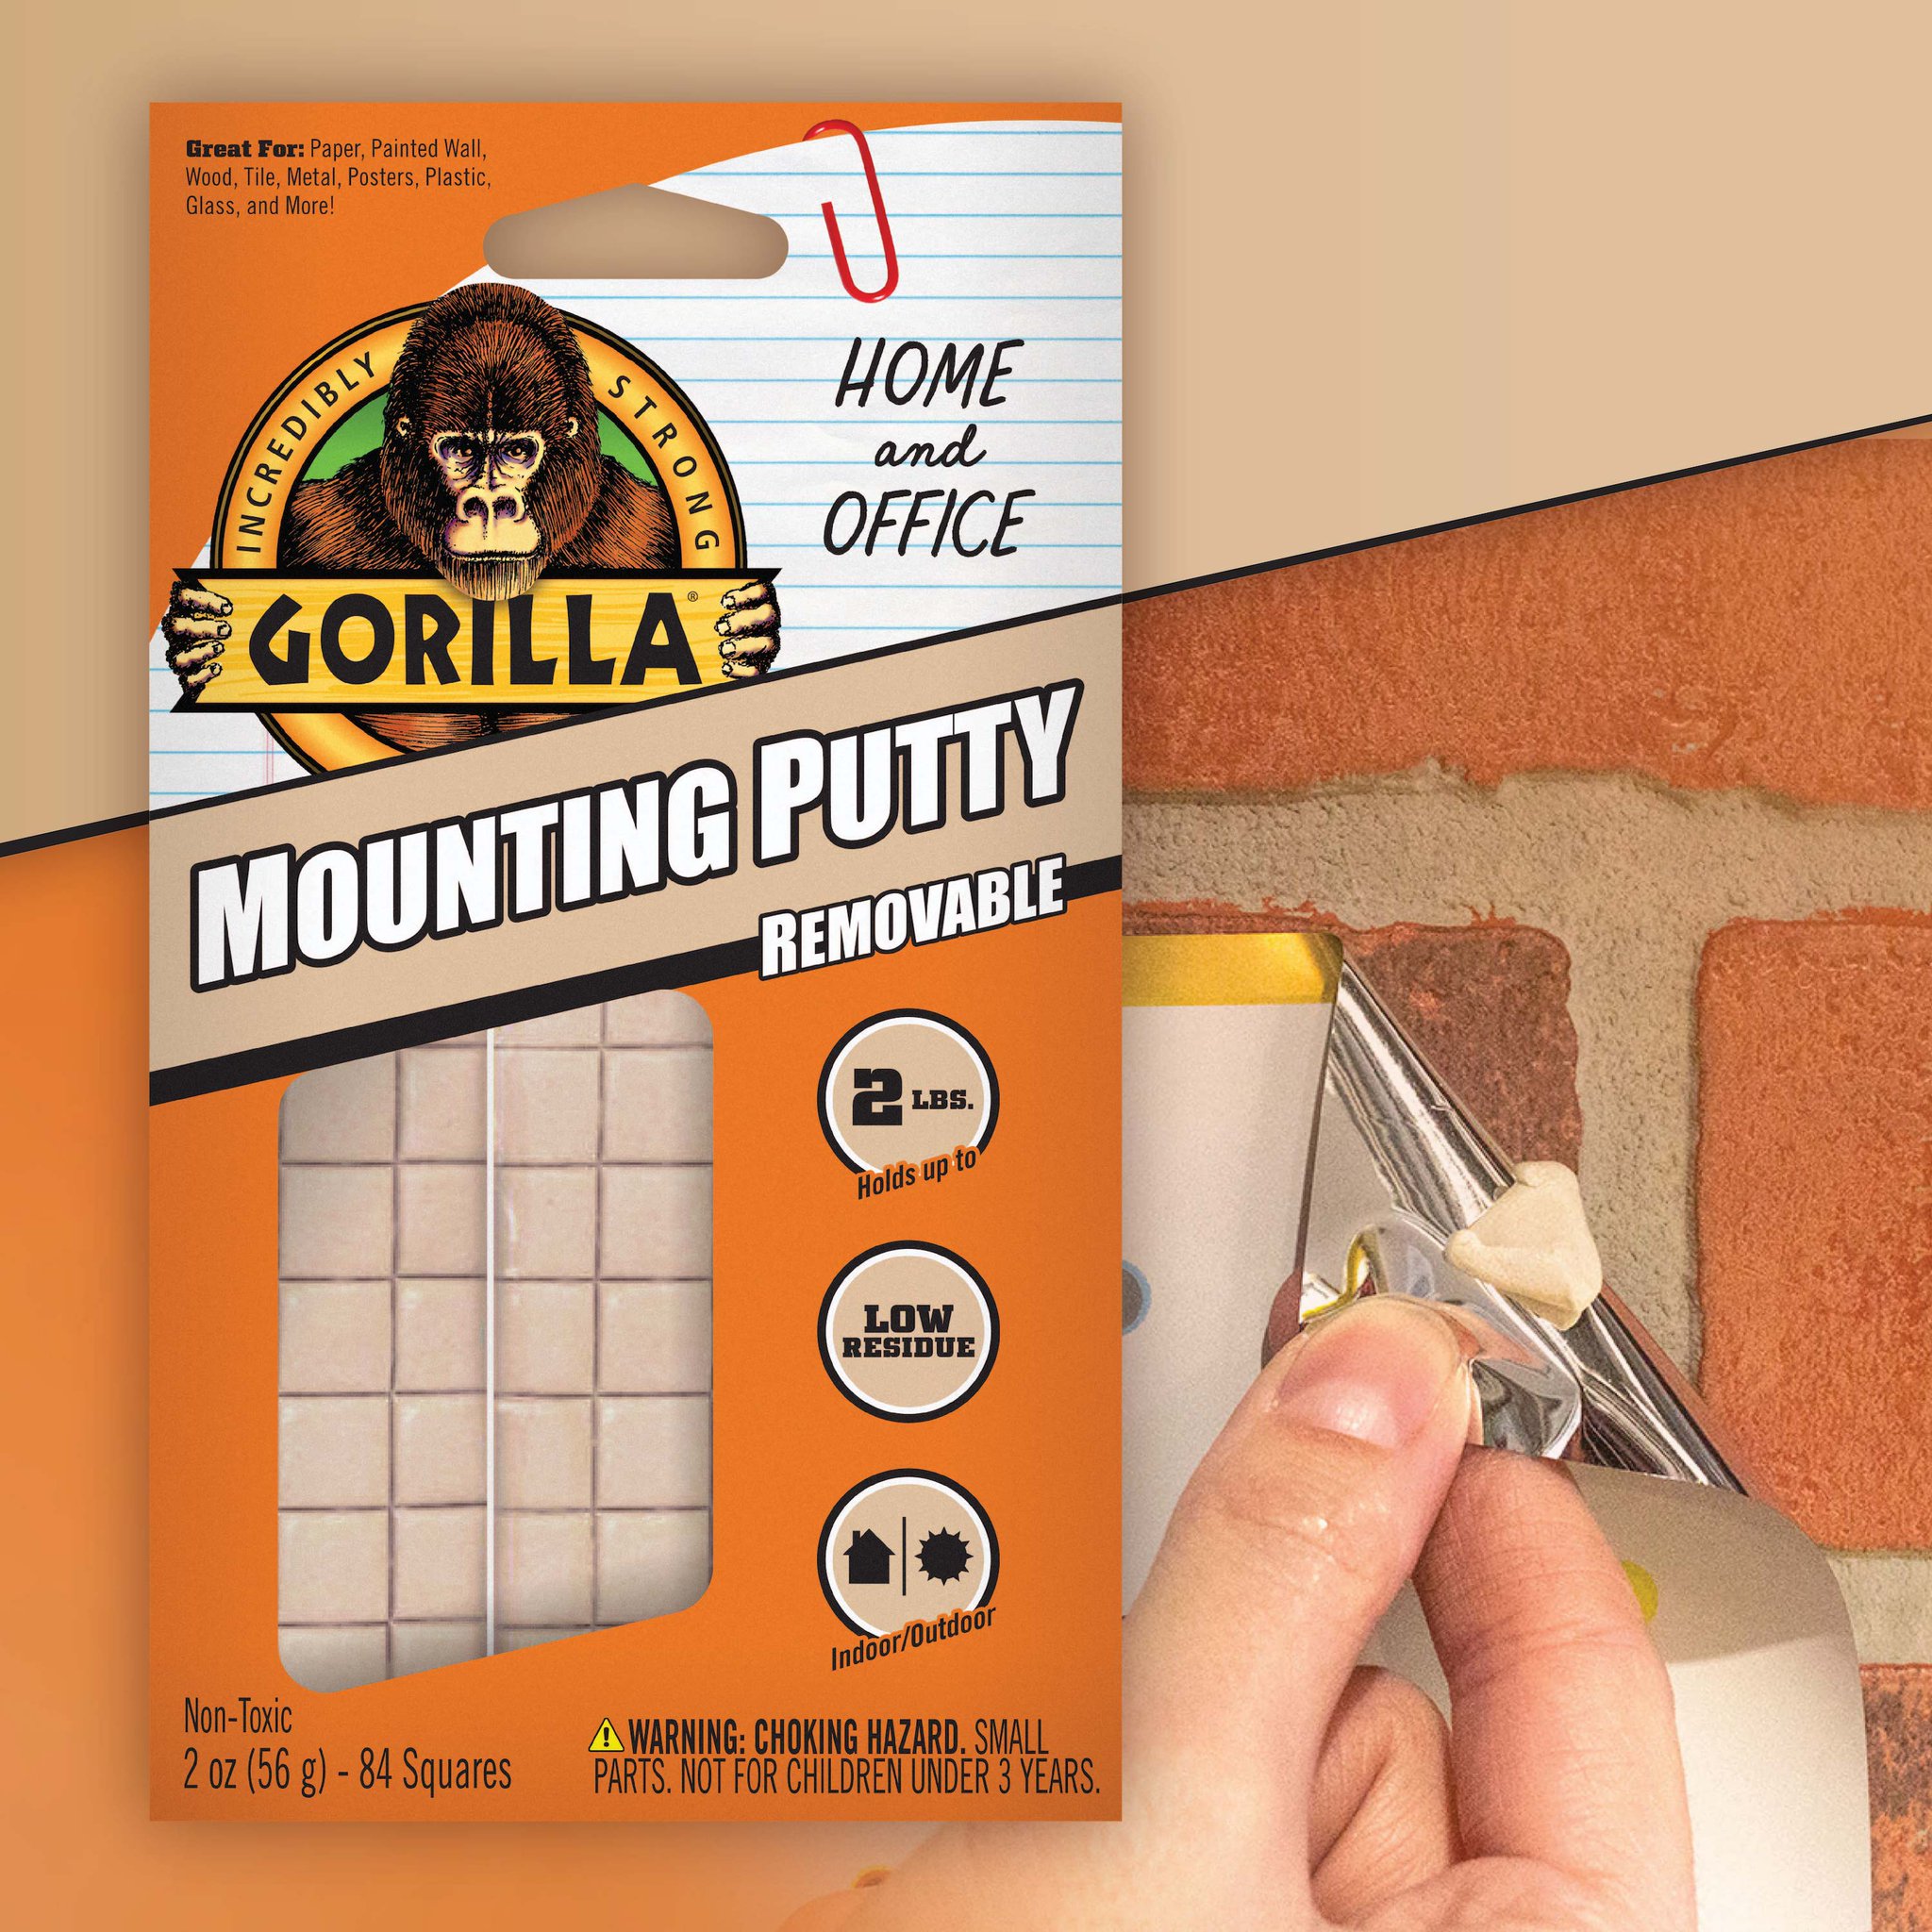 Gorilla Glue on X: Gorilla Mounting Putty is great for use indoors and  temporary outdoor use. Use it on paper, painted walls, wood, tile, metal,  posters, plastic, glass, and more!  /